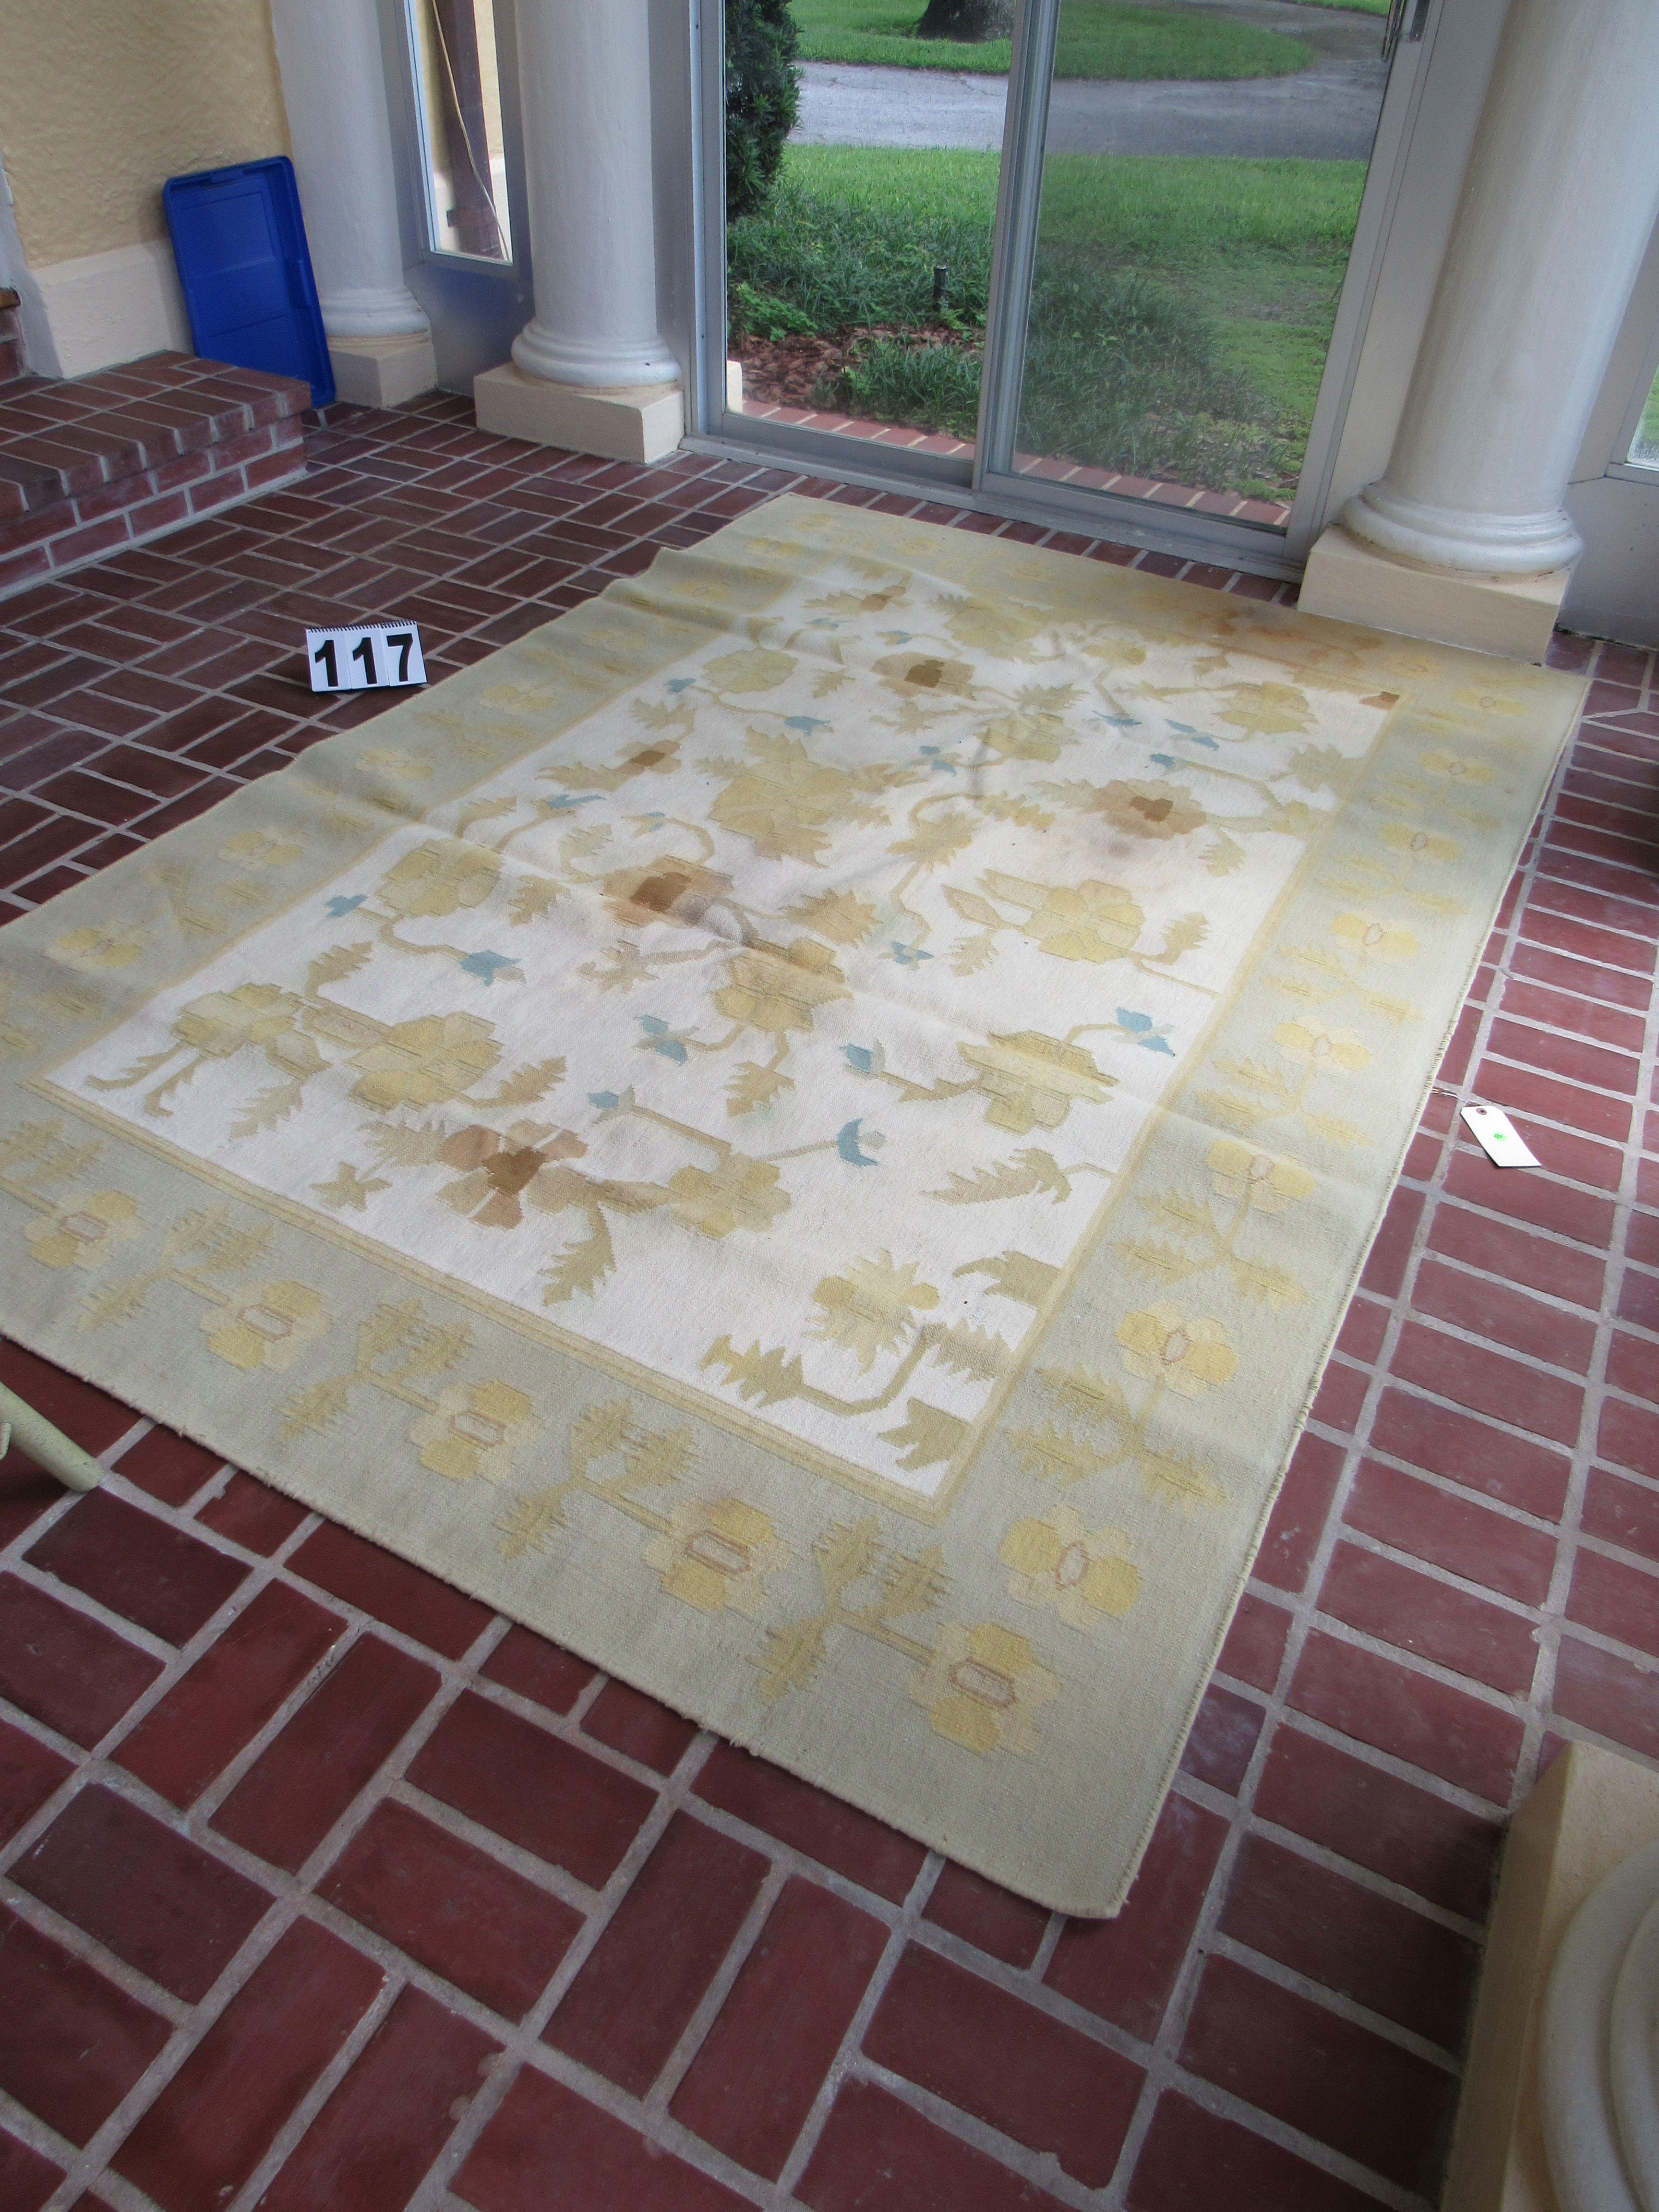 patio rug cream with gold and blue design 72" x 110" (some fade staining see photo)